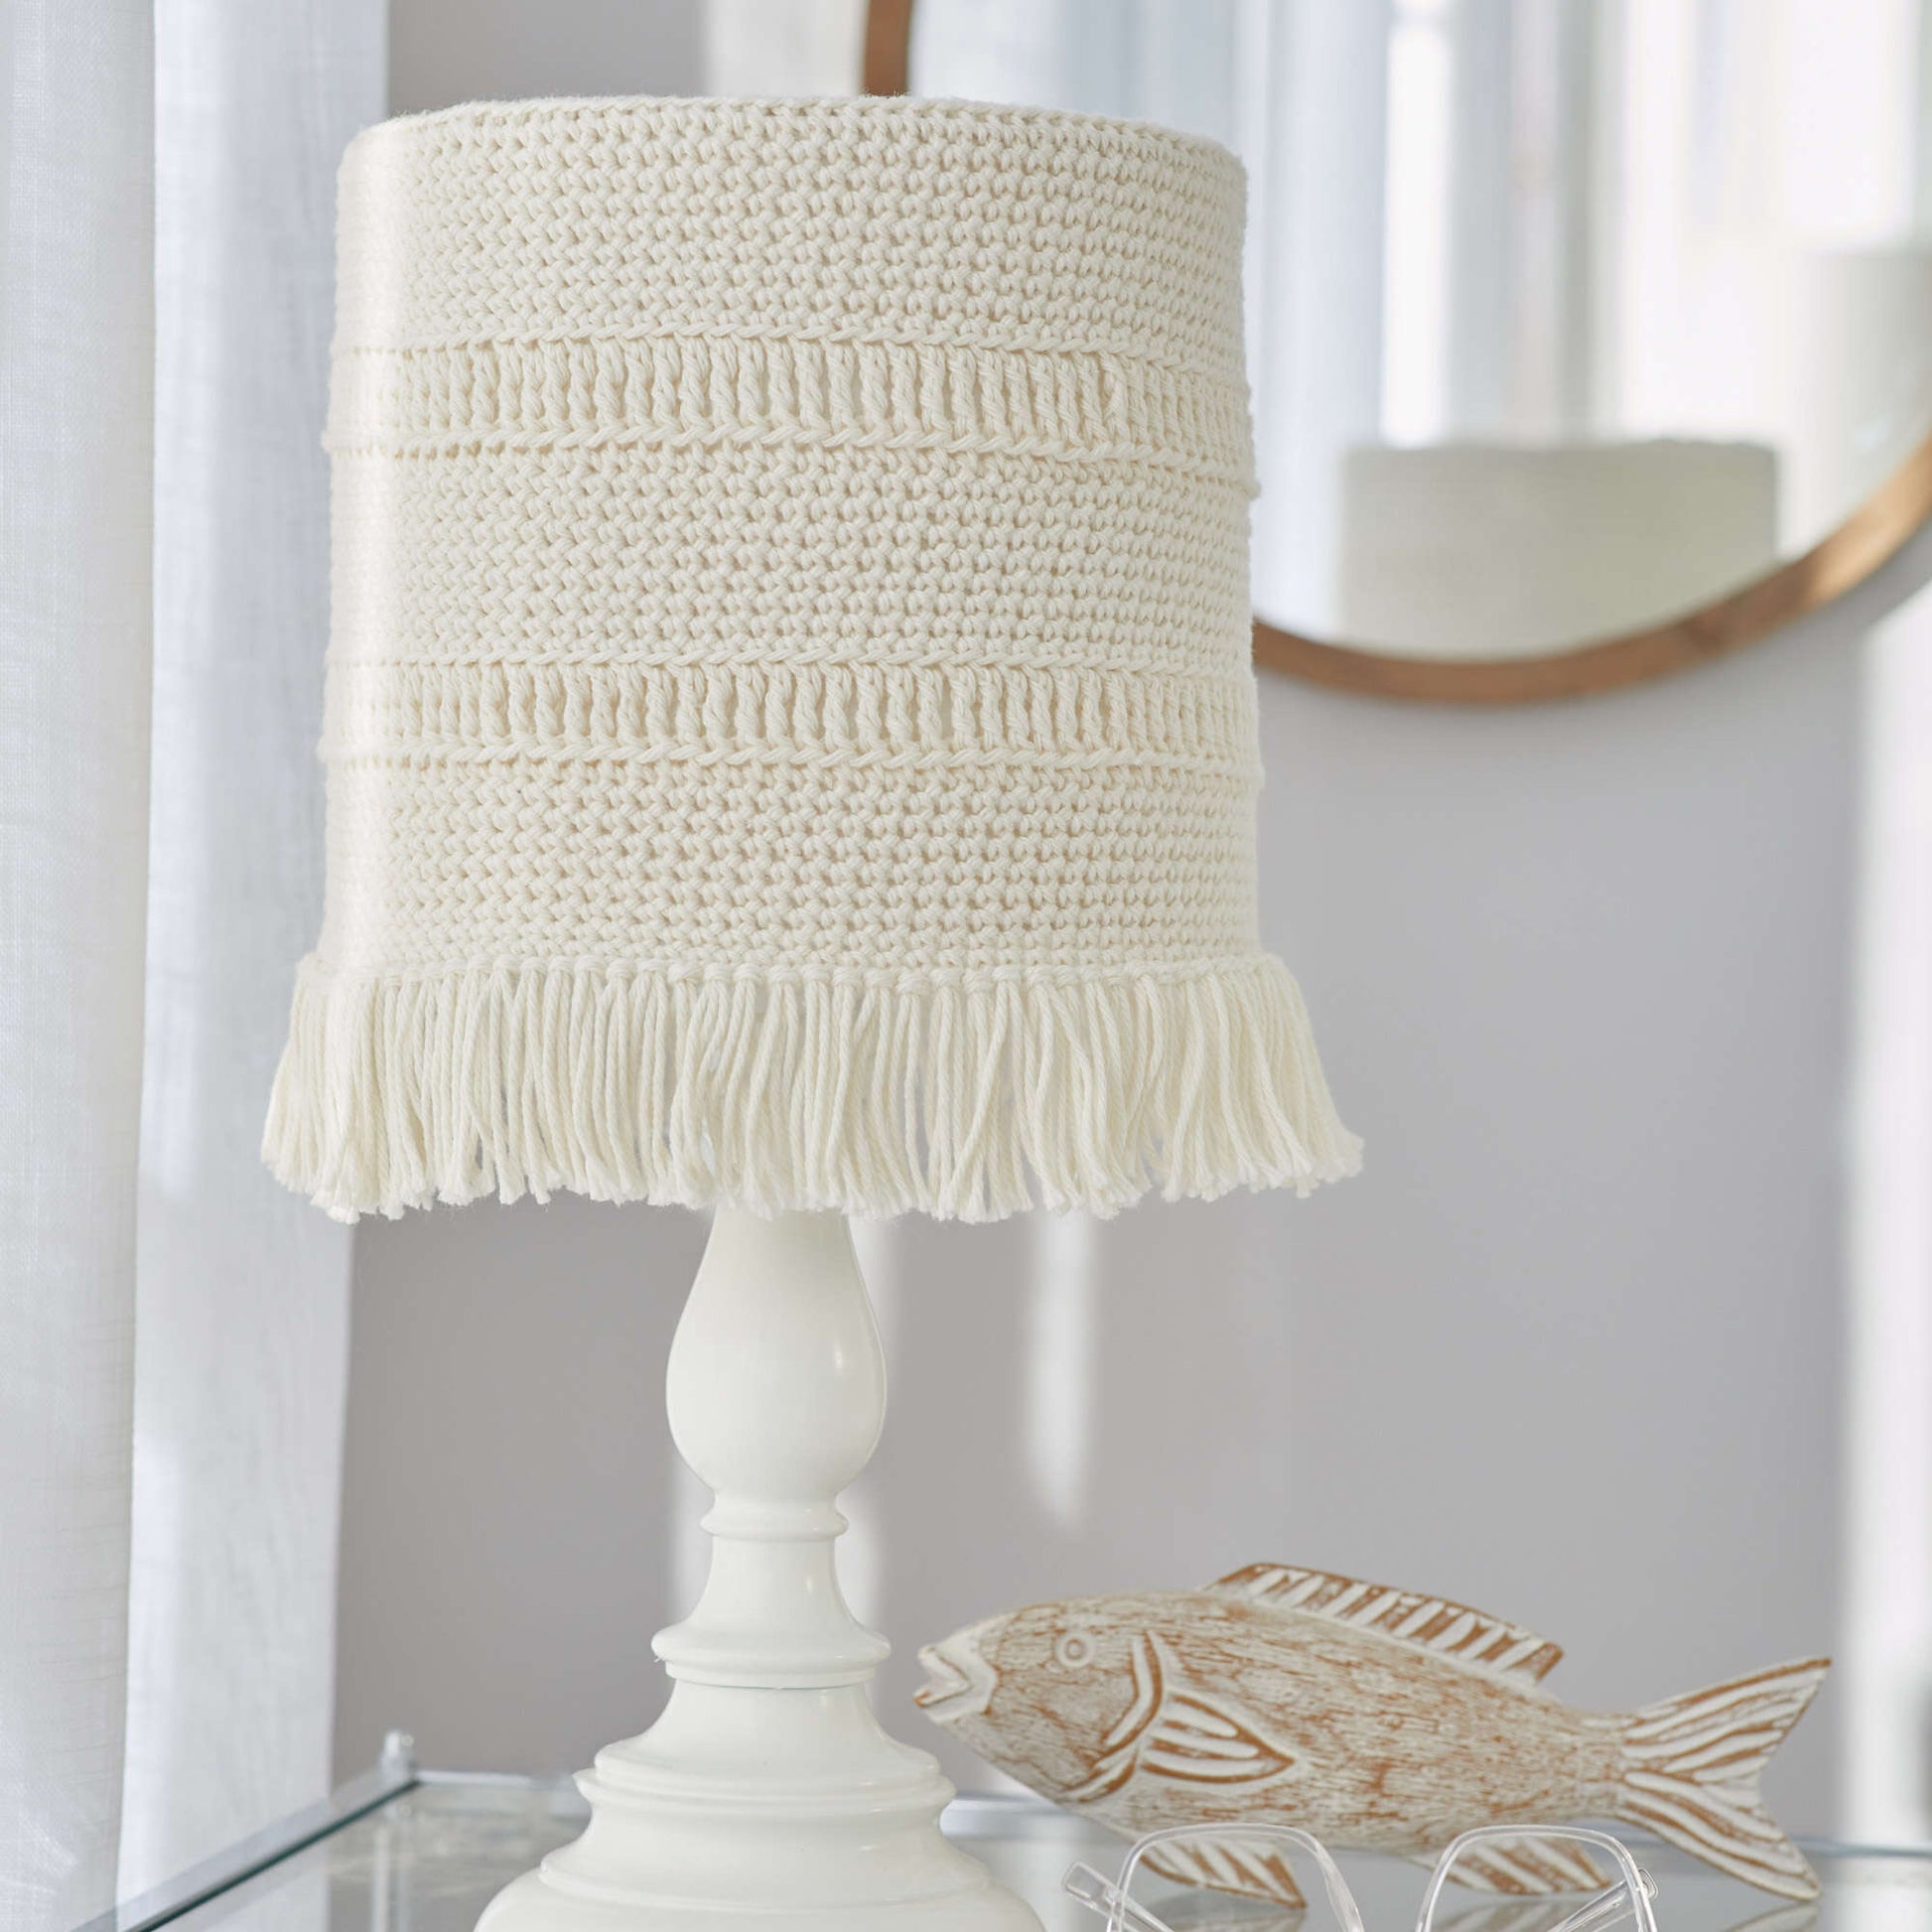 Free Red Heart Coastline Lampshade Cover Pattern